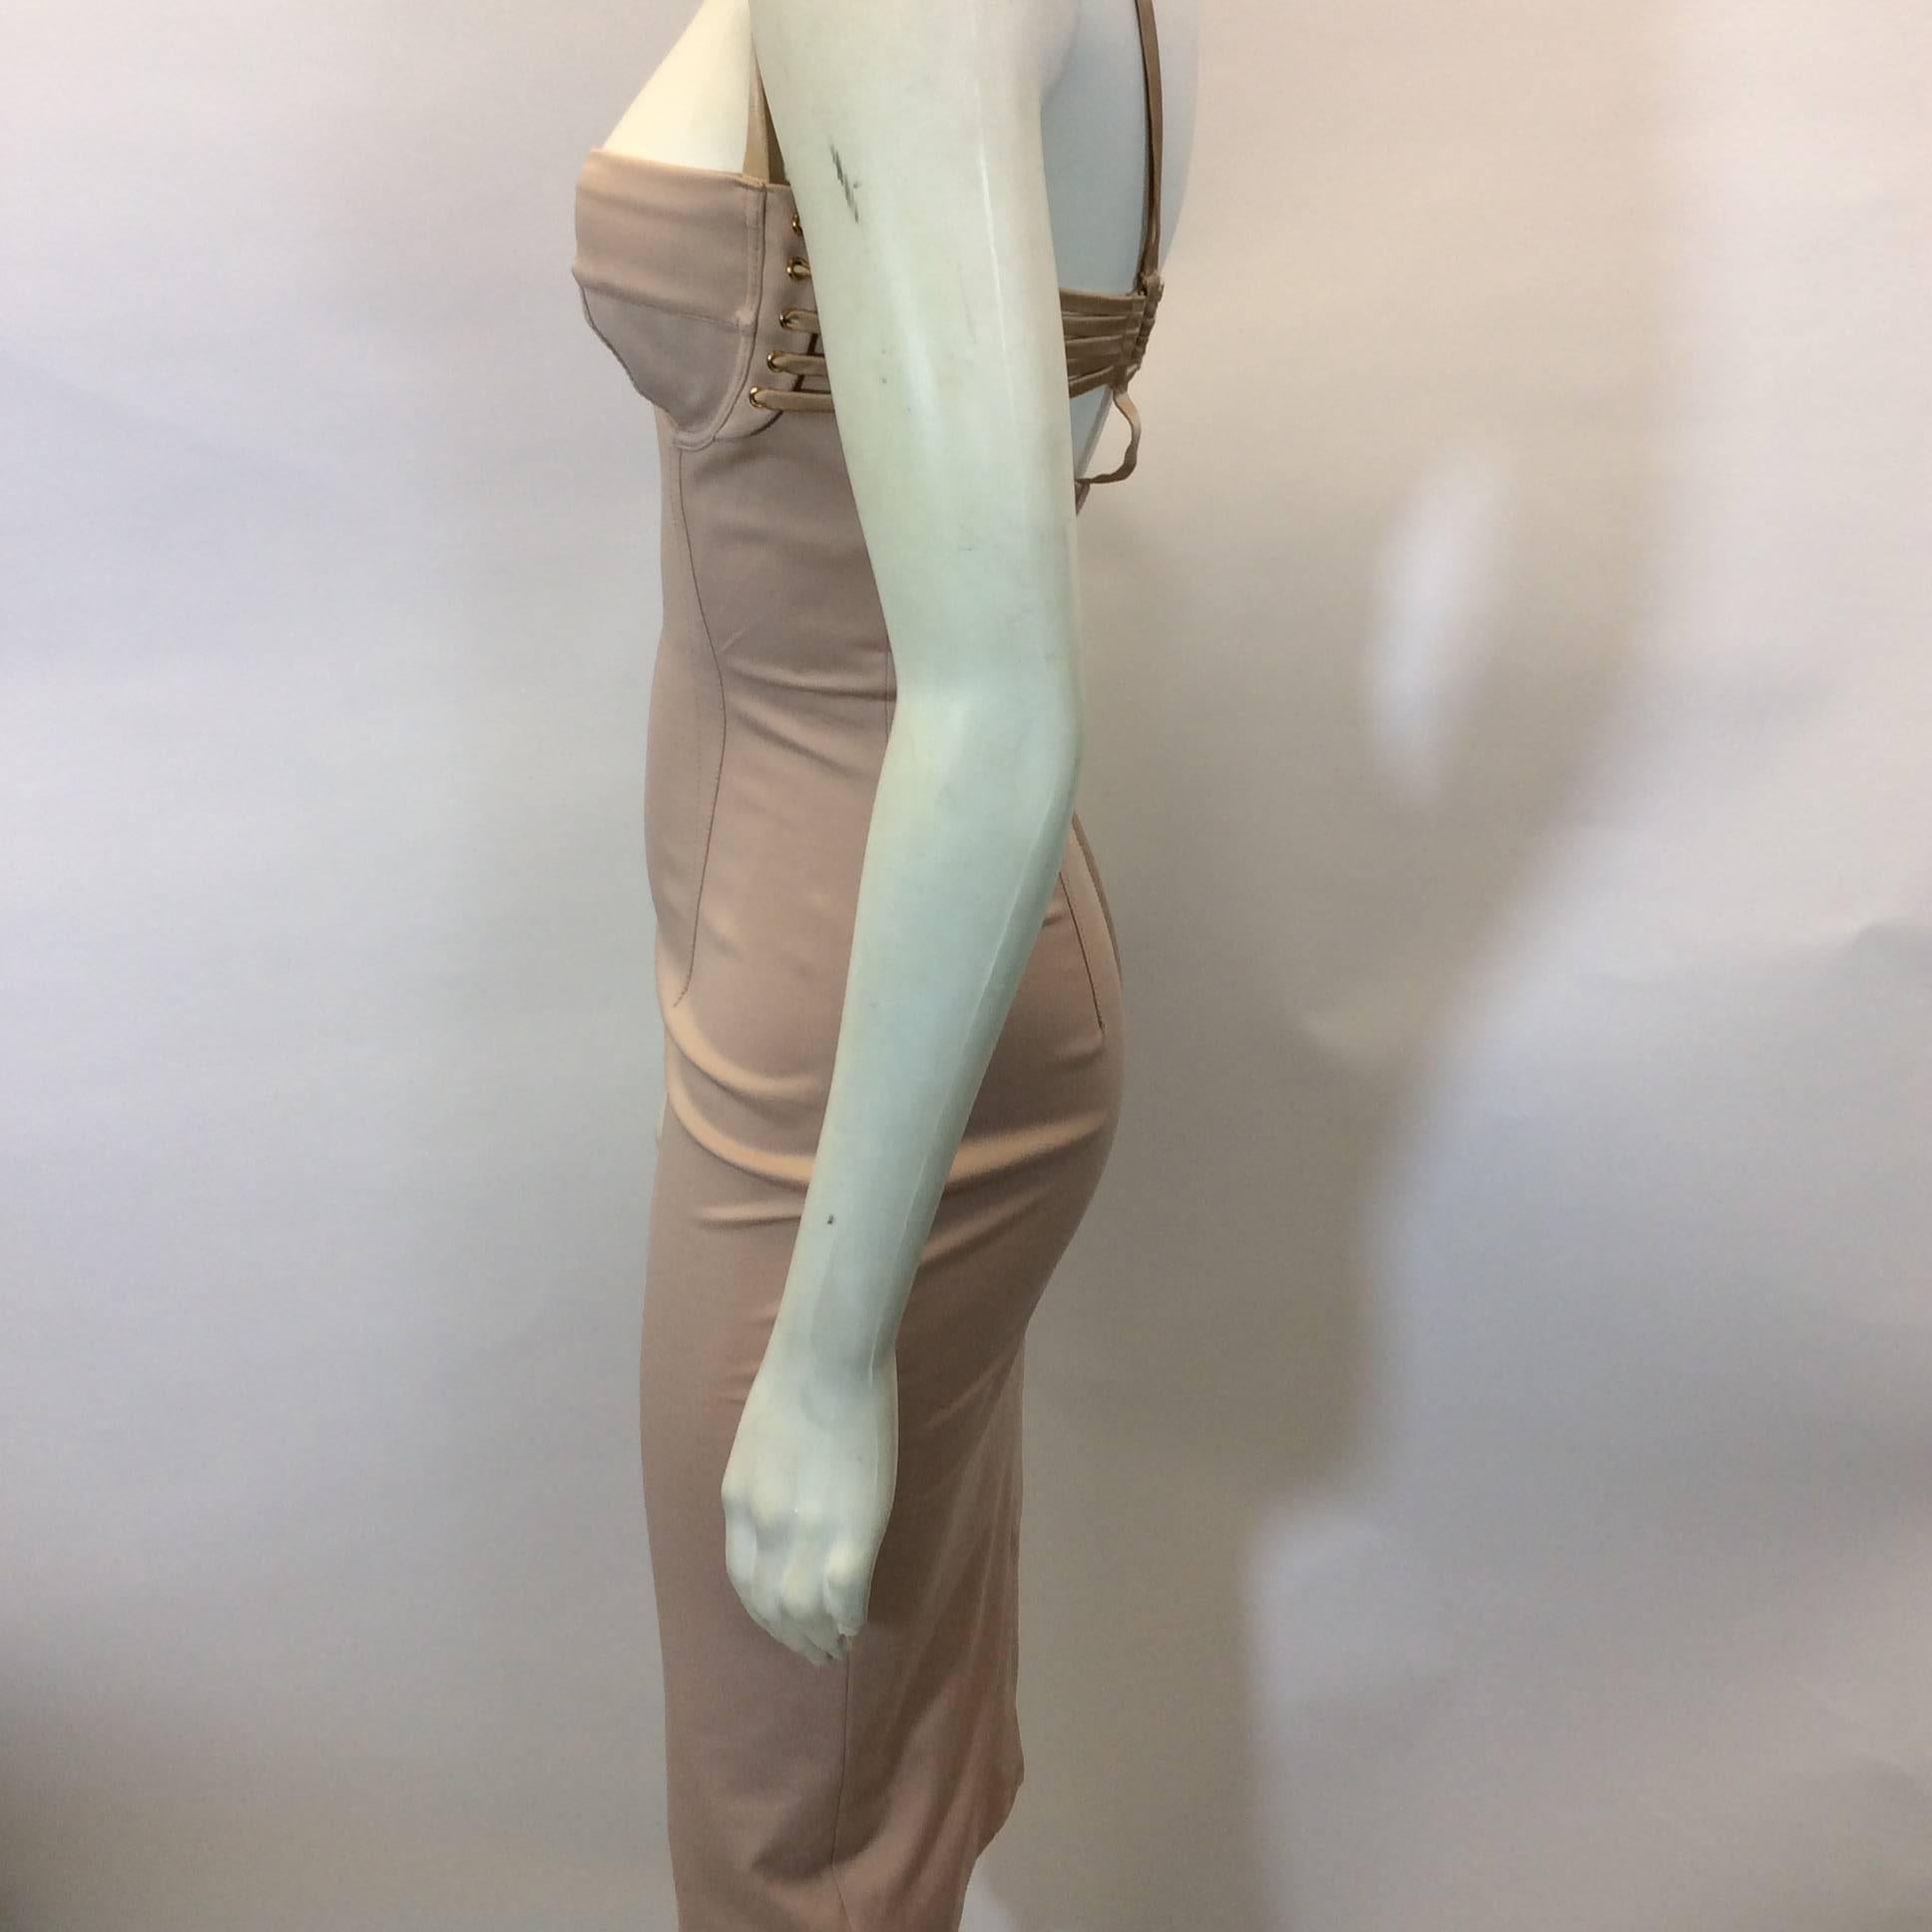 Nude Bustier Dress with Strappy Back Detail
Back includes 3 hook bra closure
Center back zipper
Includes underwire
Gold threaded side of bustier
Knee-length
Size 42
73% Rayon, 19% Nylon, 8% Spandex